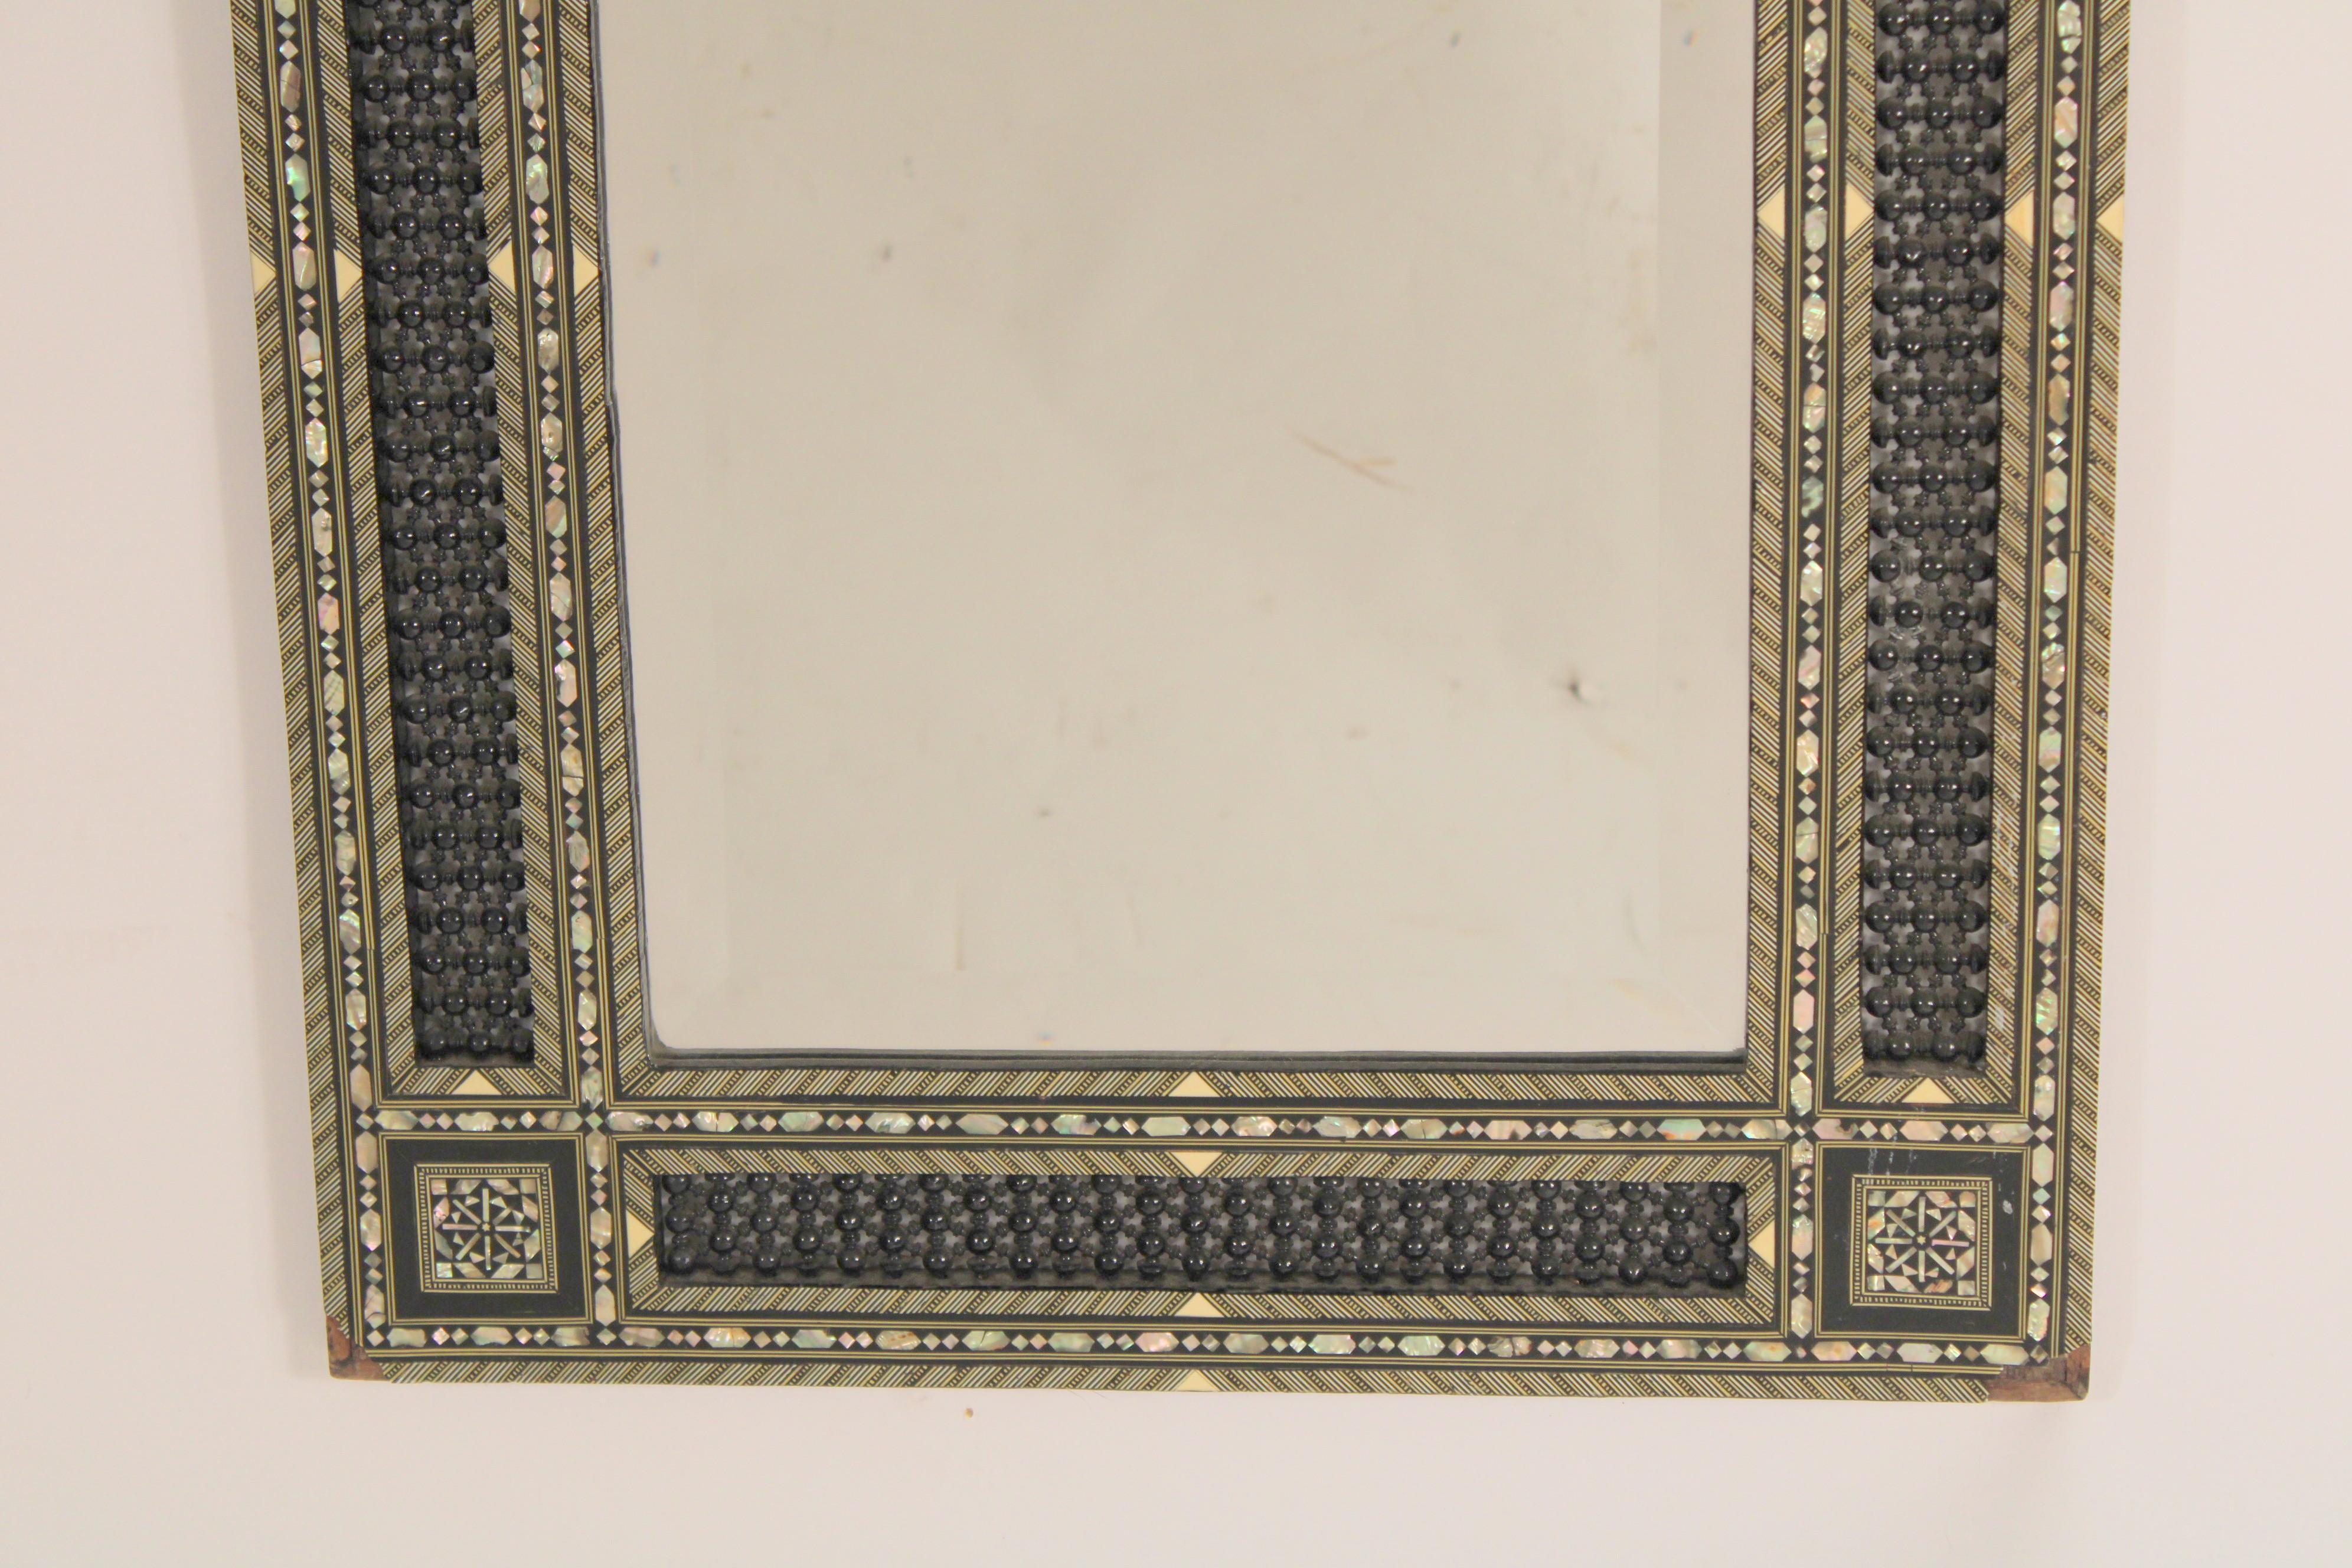 20th Century Middle Eastern Mother of Pearl Inlaid Mirror